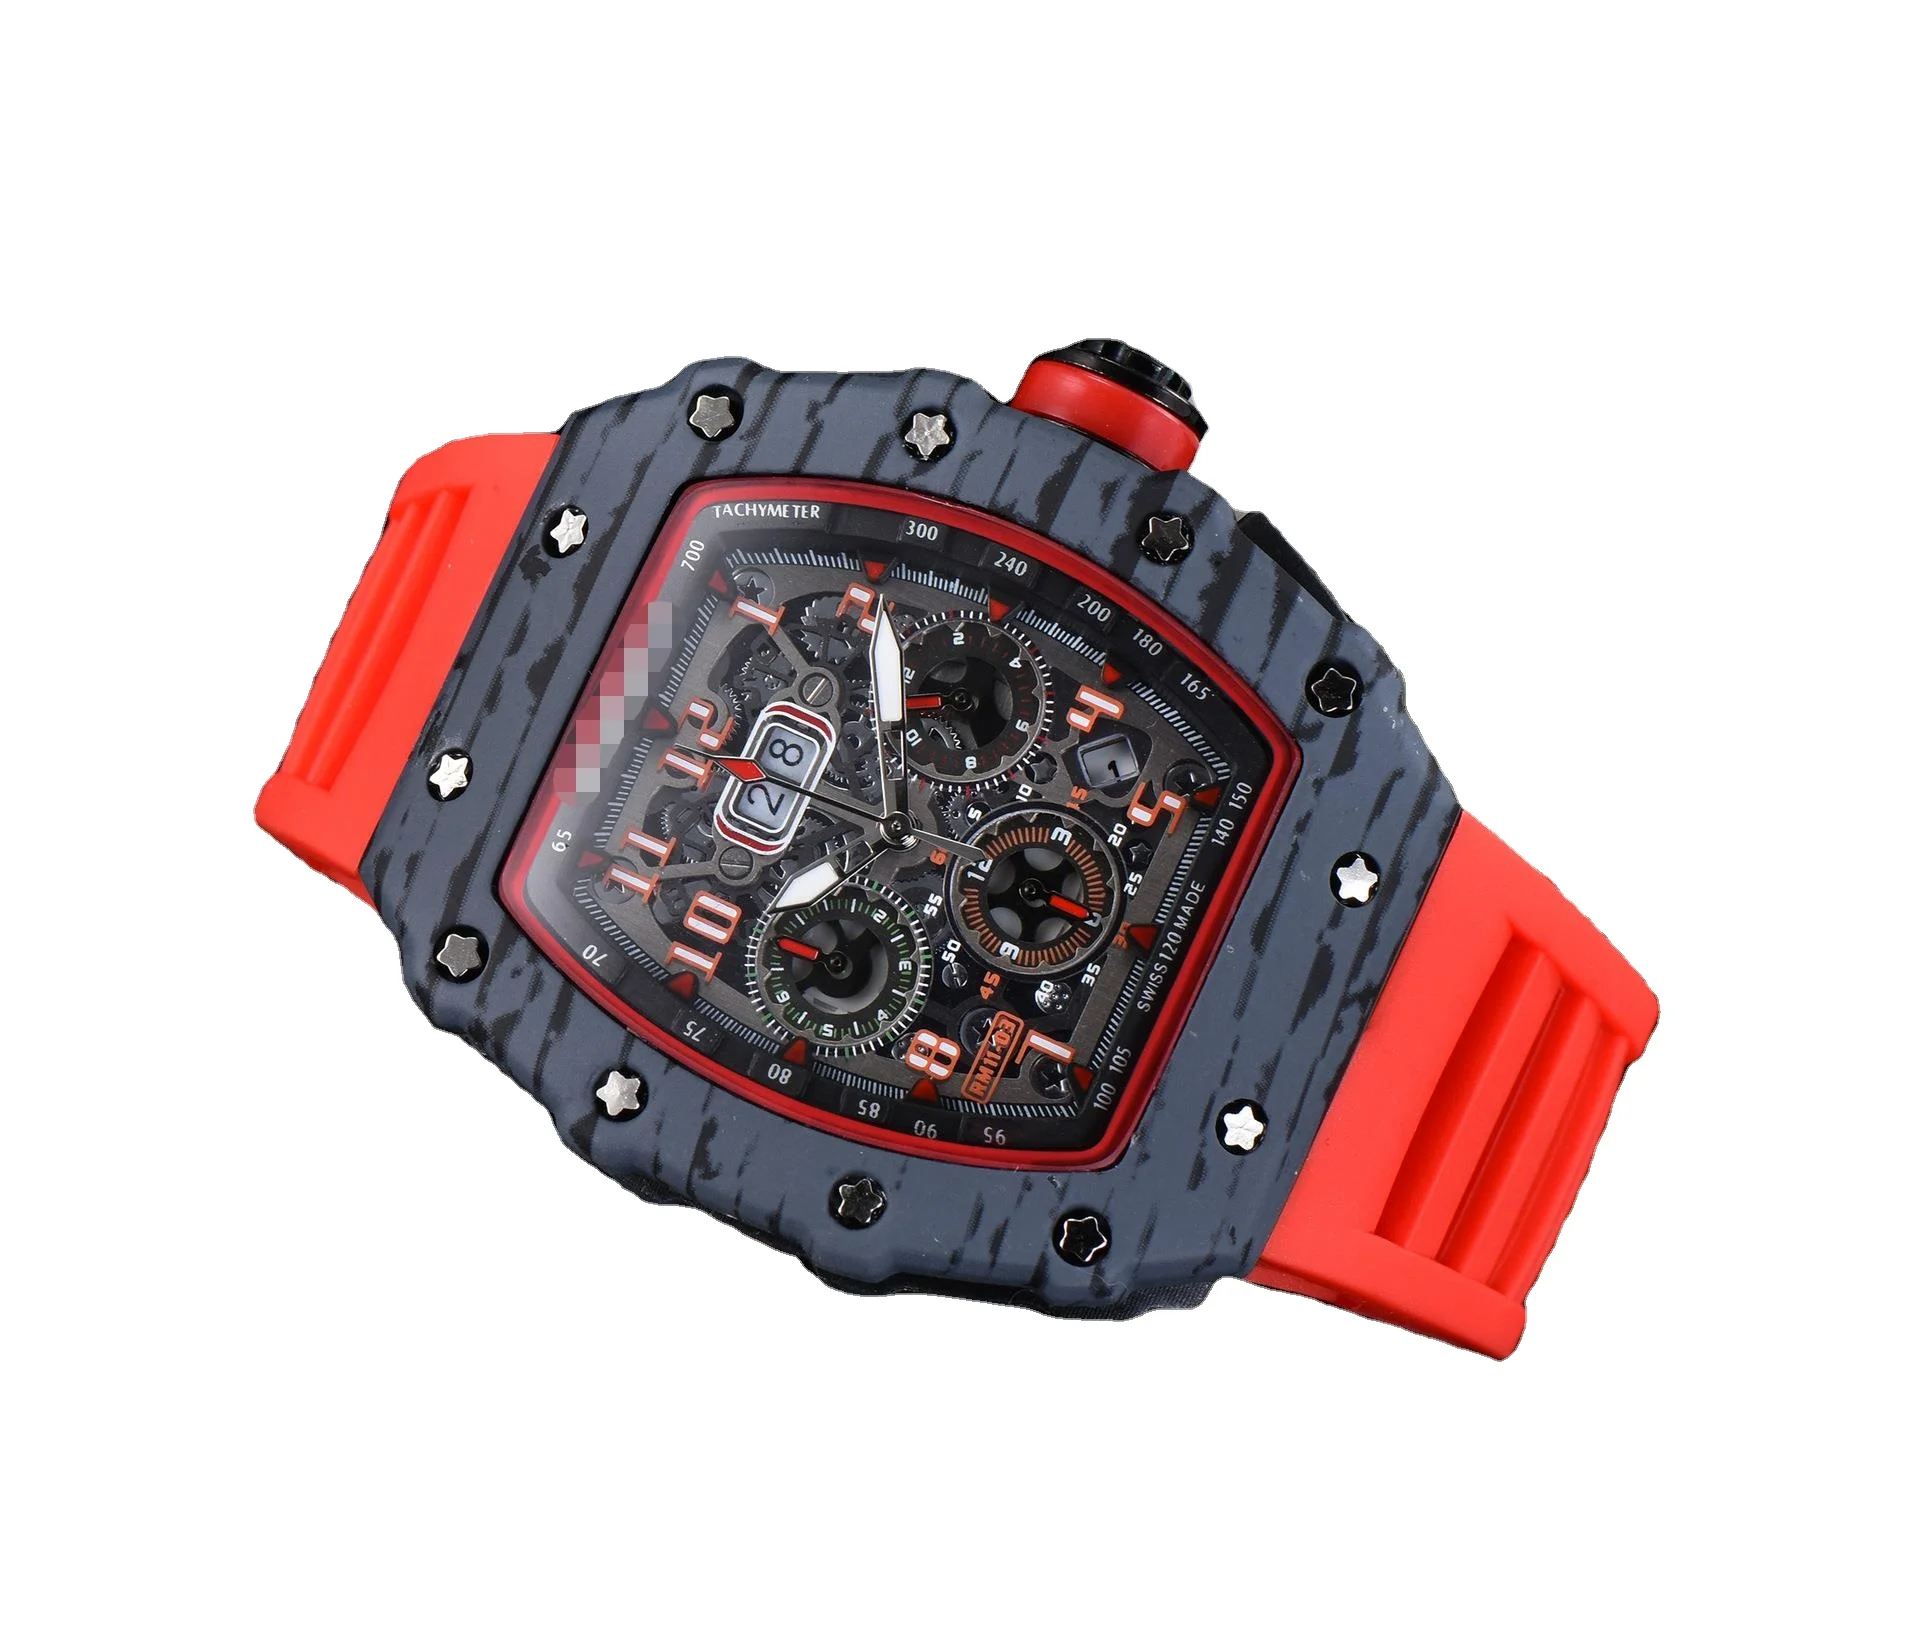 

RM3 hot sales European and American ghost watch six-hand quartz full-featured men's watch